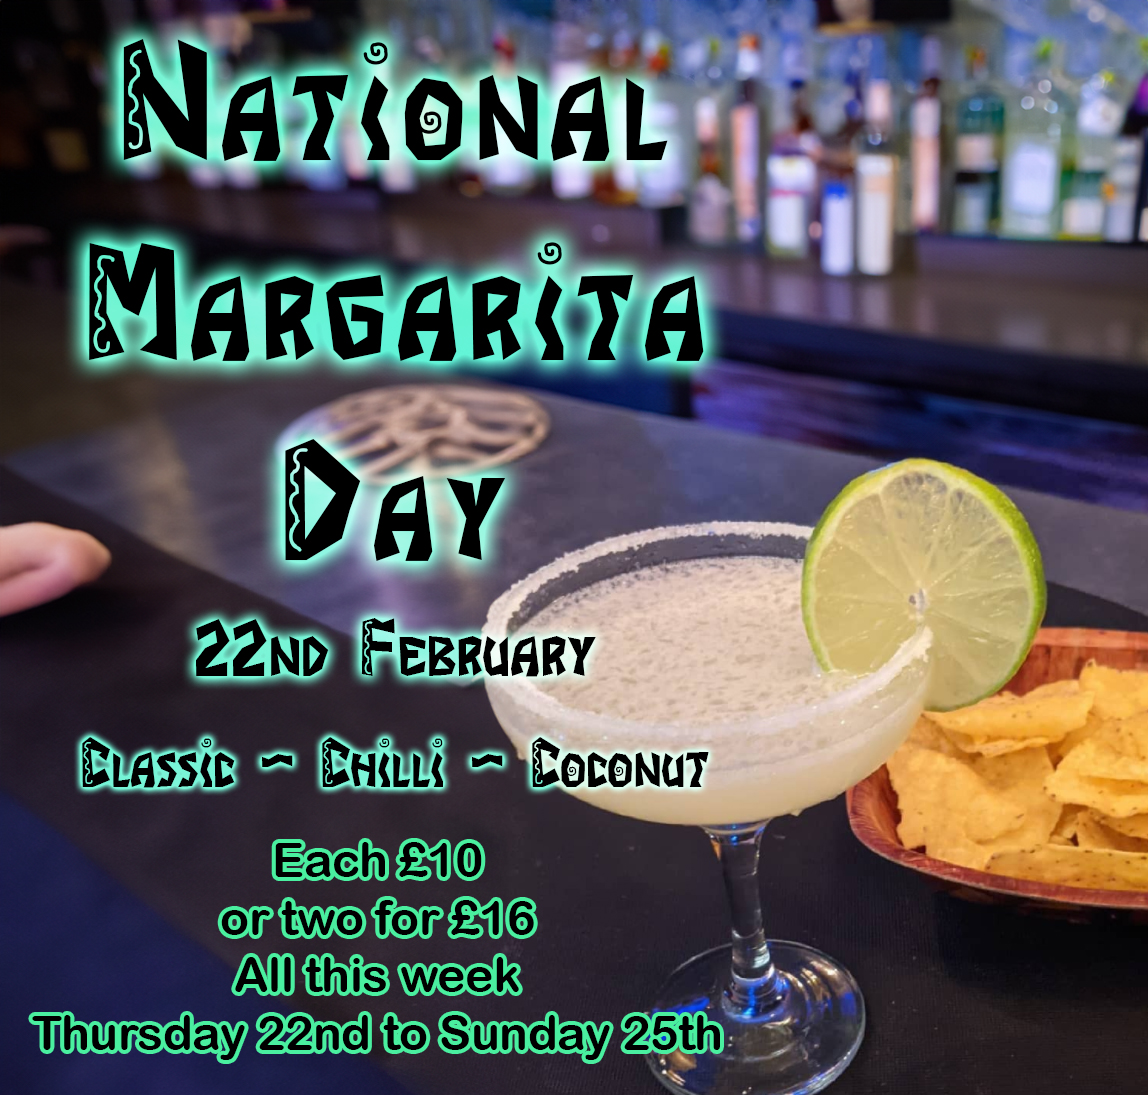 Dive out of the February gloom and taste some sunshine with your choice of Margarita - this week only £10 each, £16 for a pair! #cocktails #brighton #brightoncocktails #brightondeals #margarita #nationalmargaritaday #brightonbargains #cocktaillounge #hiddenheartofstjamessstreet